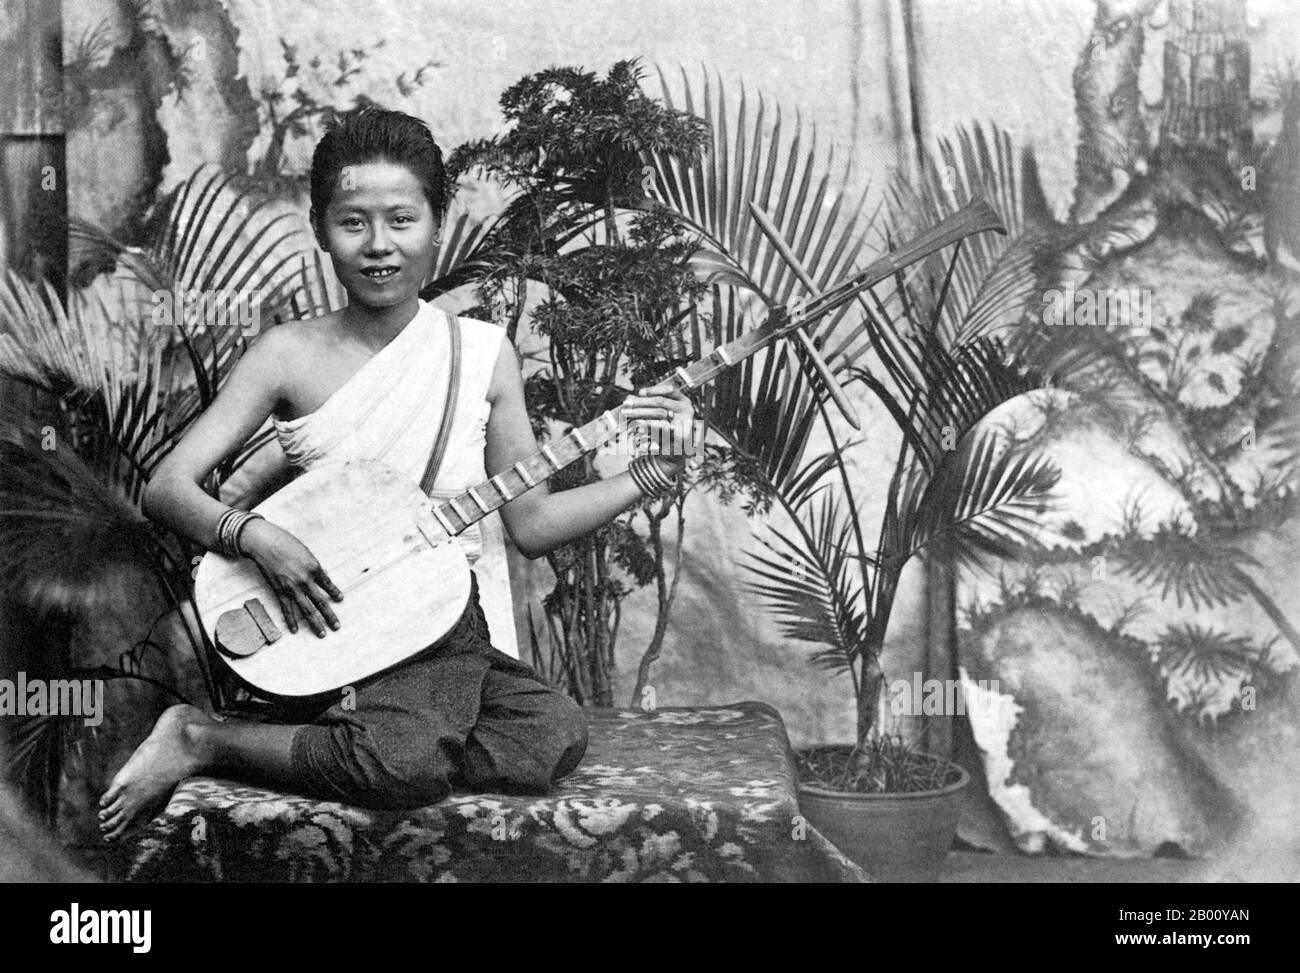 Cambodia: A 1928 photograph of a young musician playing a 'chapei' in the Royal Palace in Phnom Penh.  A 'chapei dong veng' is a Khmer two-stringed, long-necked traditional guitar. The girl in the picture would most likely have played to the court of King Sisowath Monivong who was the king of Cambodia from 1927 until 1941. Stock Photo